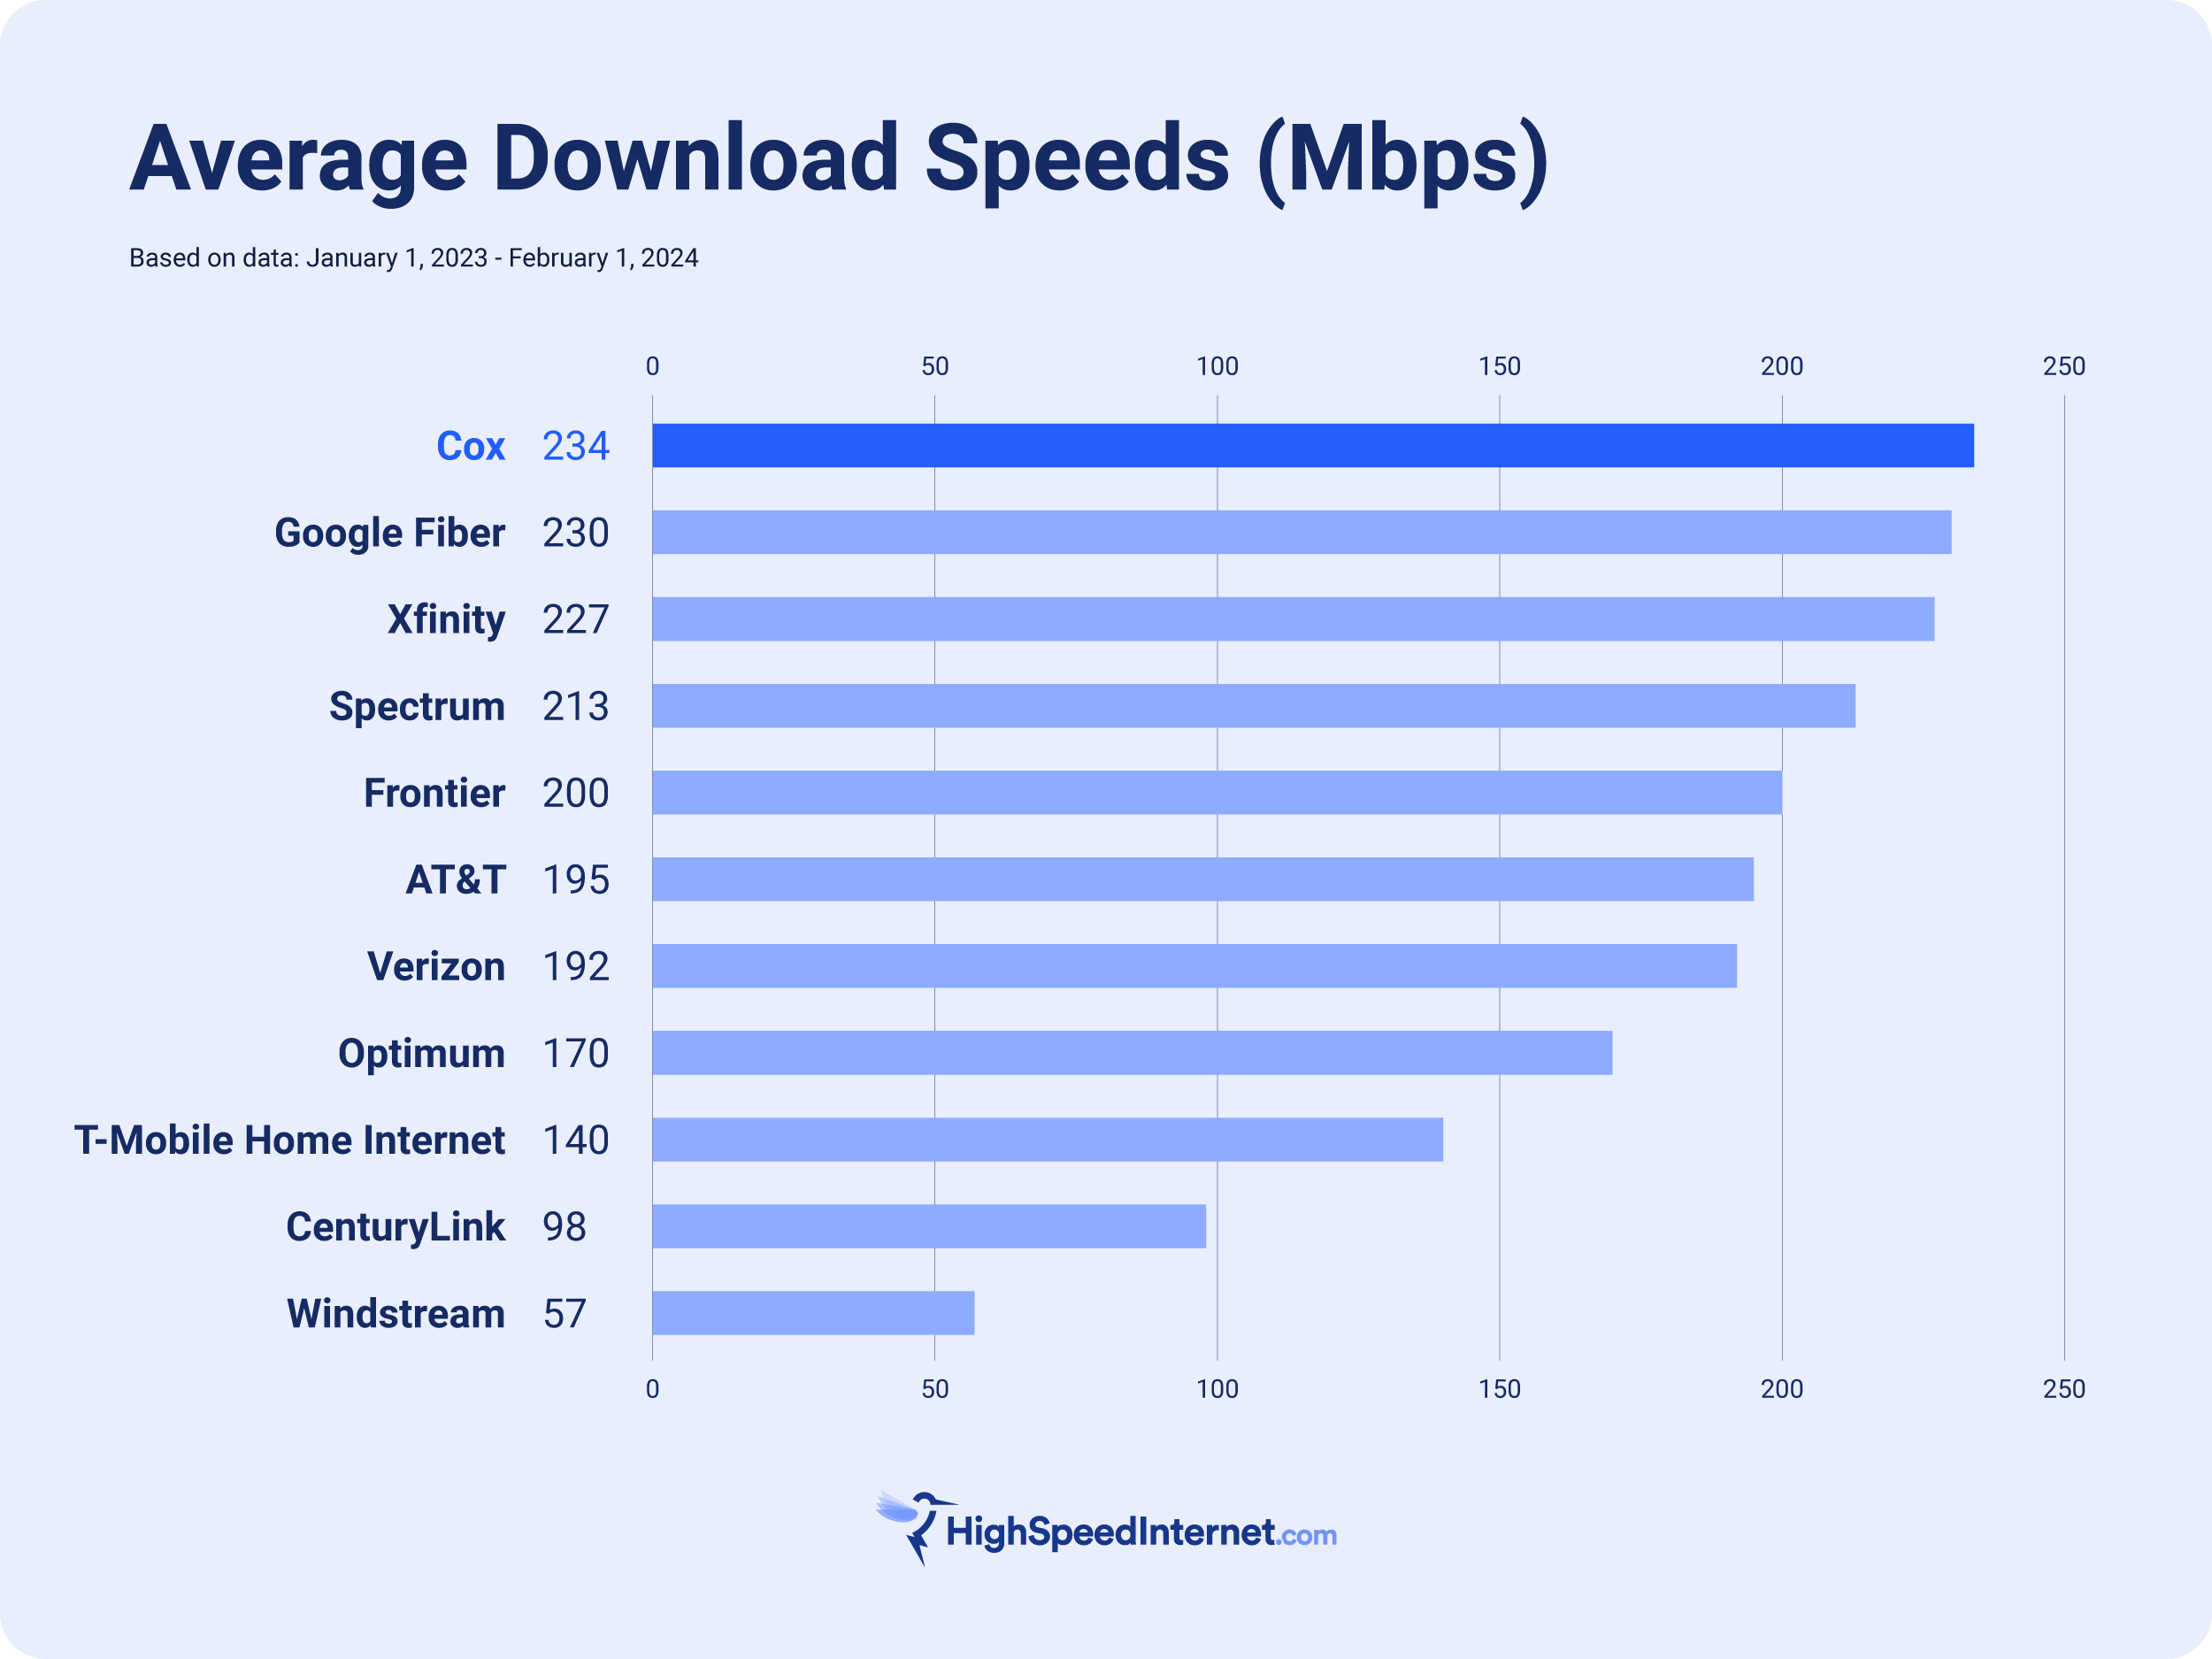 Bar chart showing the average download speeds of providers from January 1, 2023 thru February 1, 2024. Order of the providers from Fastest to Slowest Megabits per second: Cox, Google Fiber, Xfinity, Spectrum, Frontier, AT&T, Verizon, Optimum, T-Mobile Home Internet, CenturyLink, Windstream.